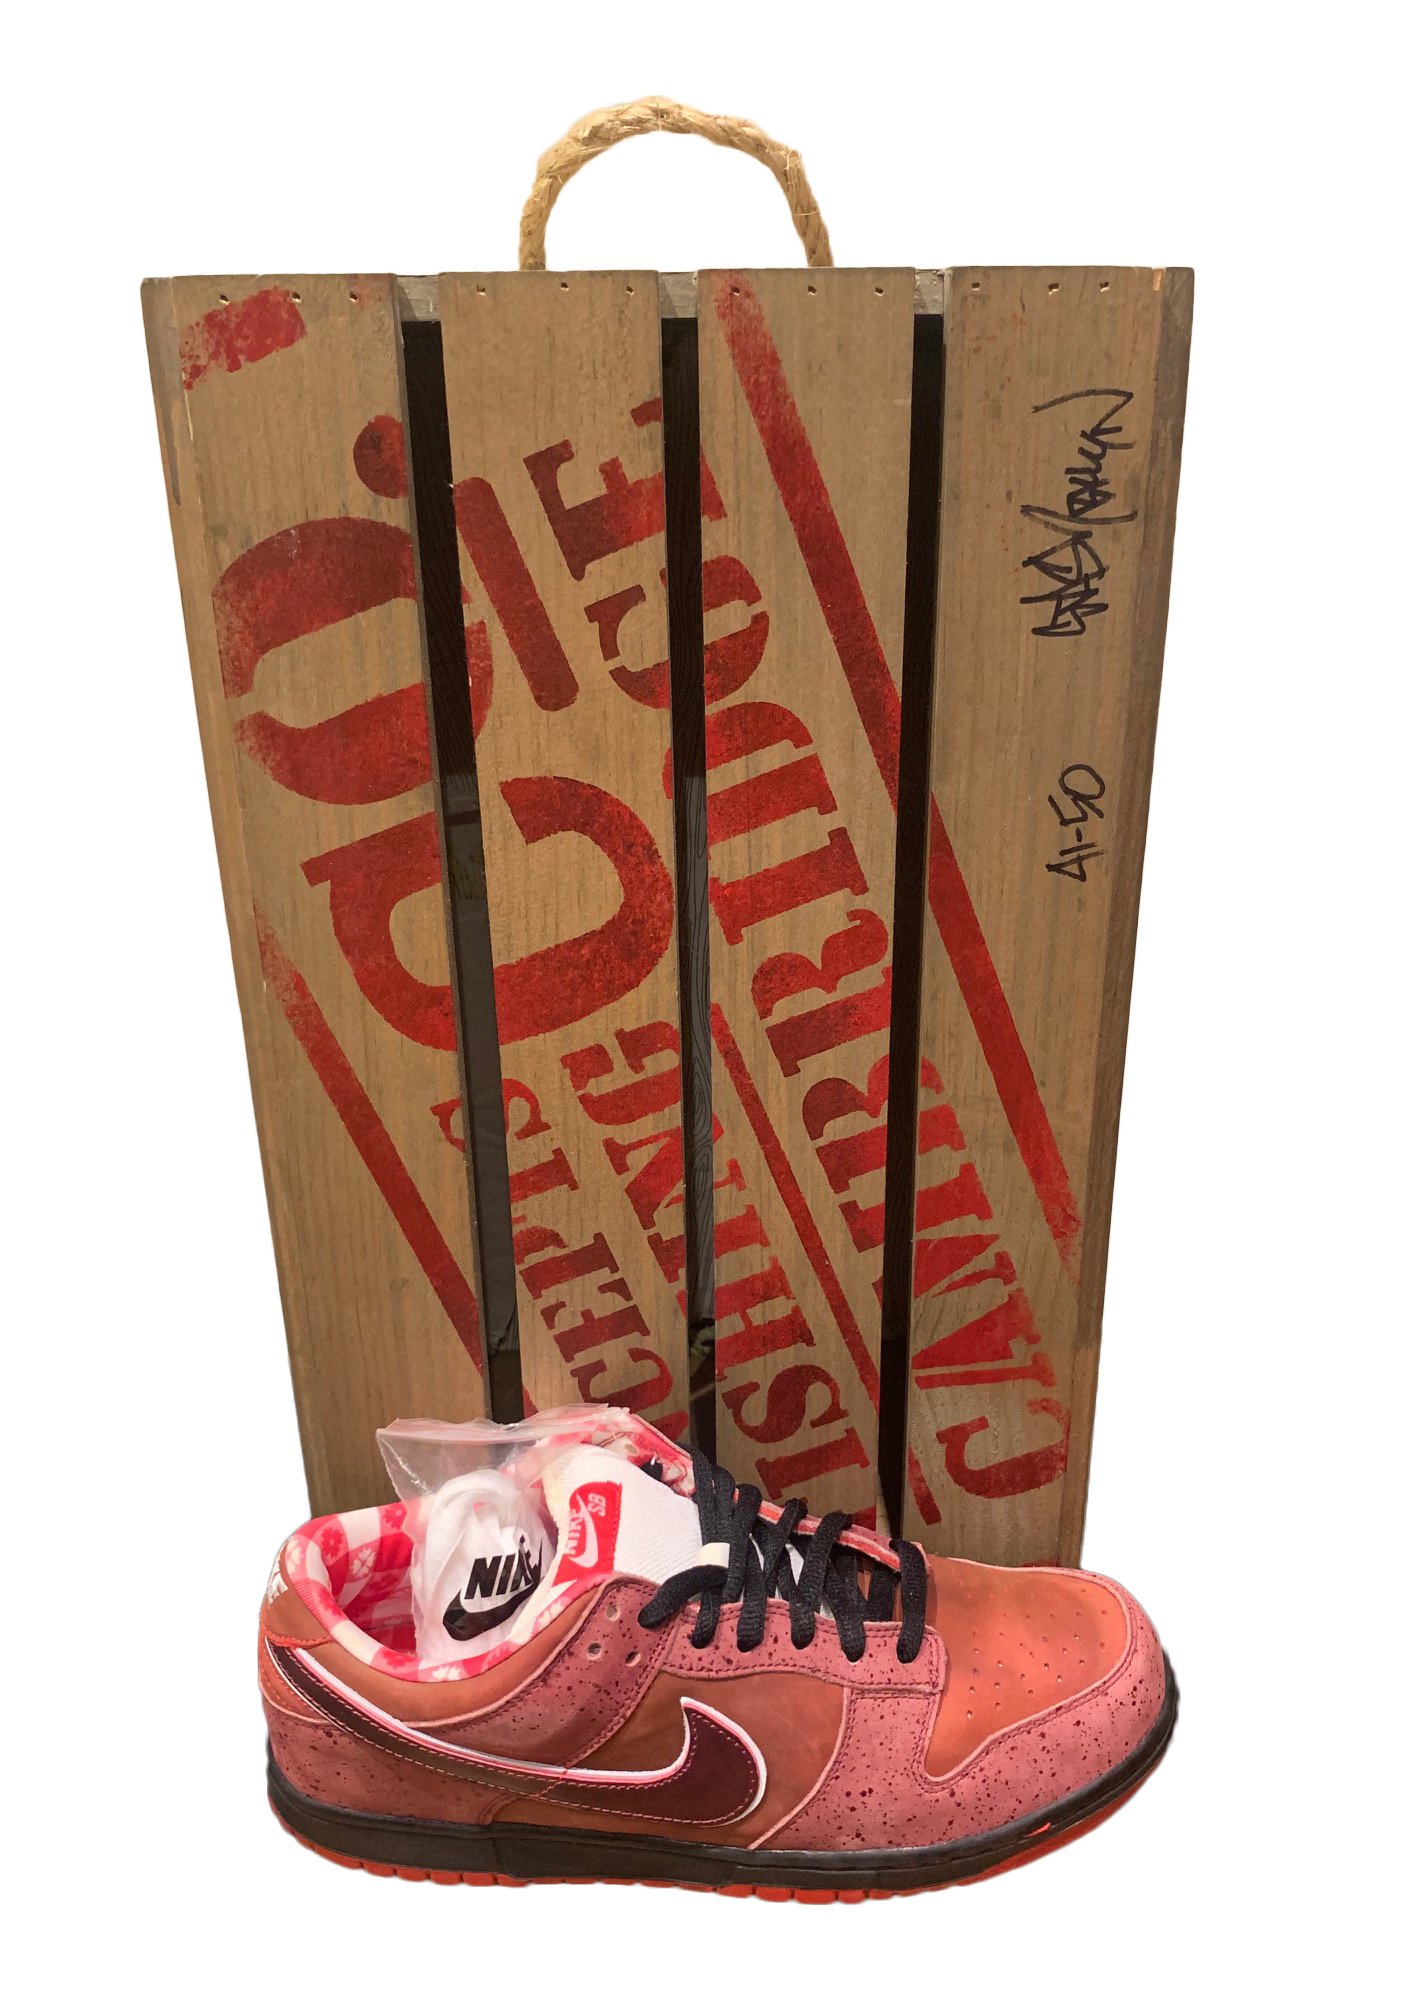 Nike Dunk SB Low Red Lobster (Special Box) sneaker informations